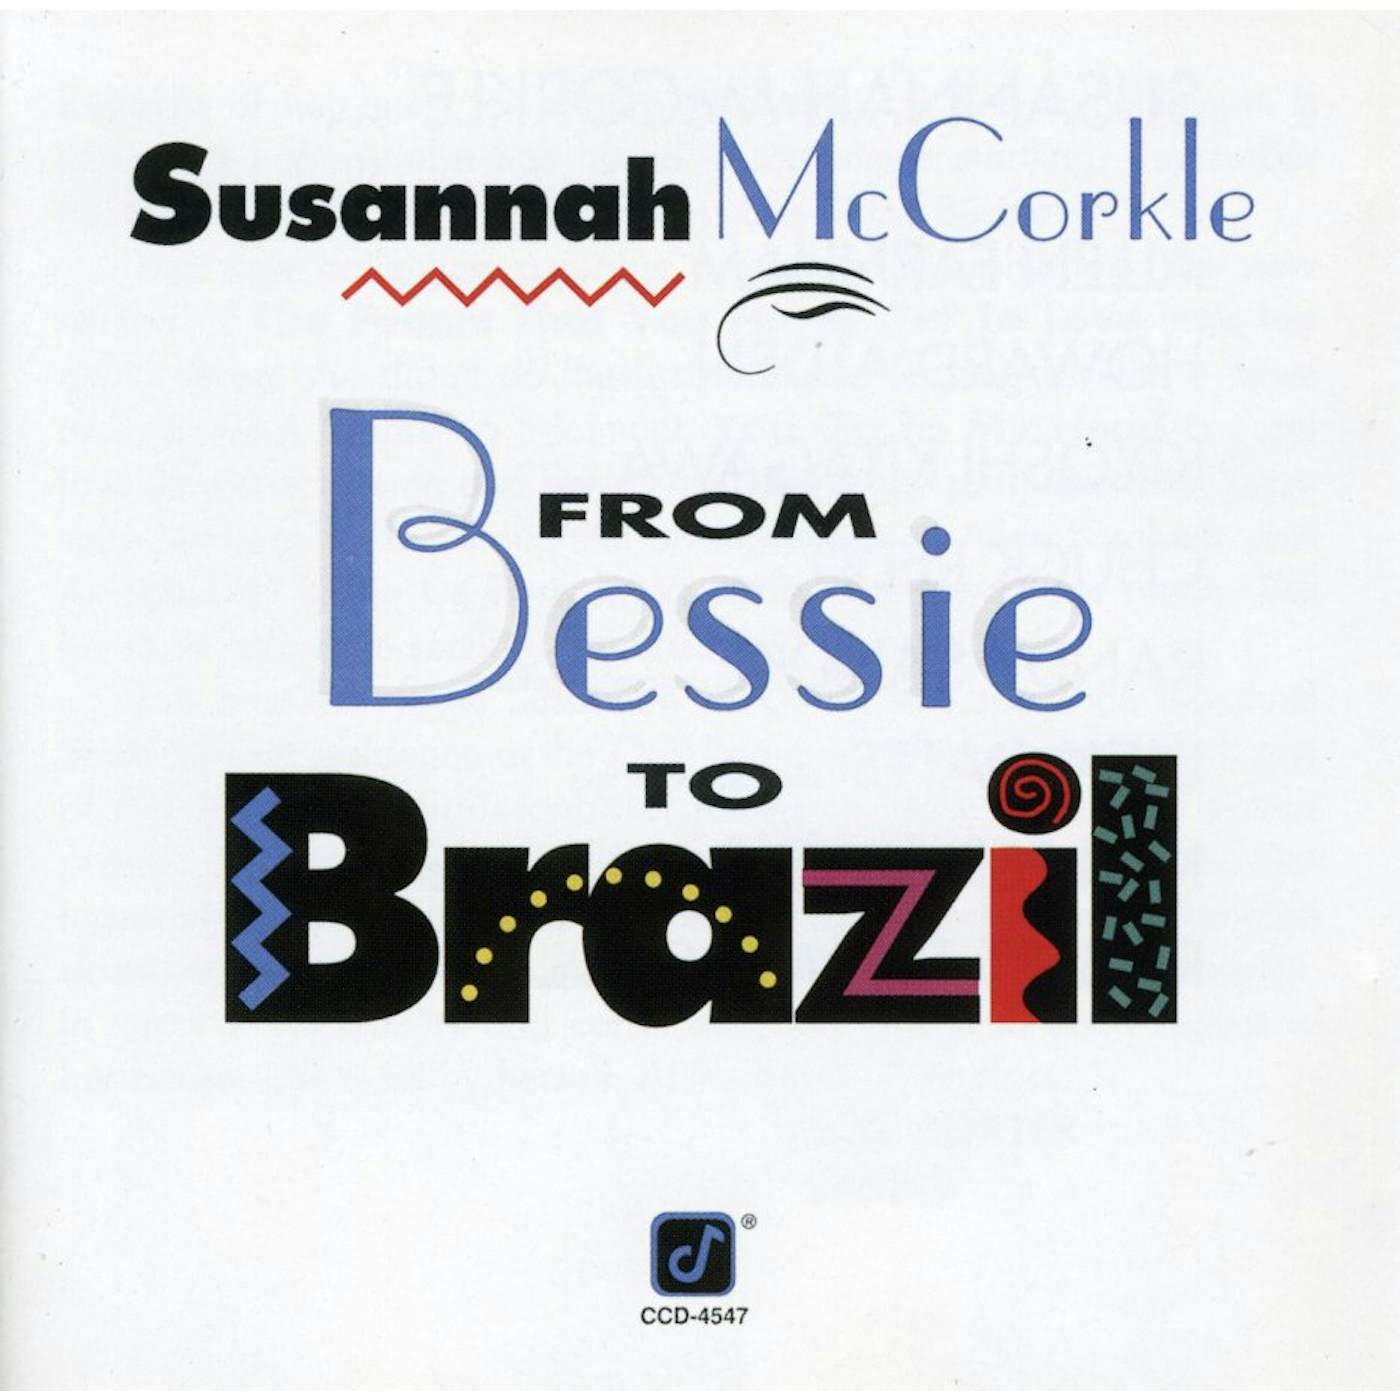 Susannah McCorkle FROM BESSIE TO BRAZIL CD